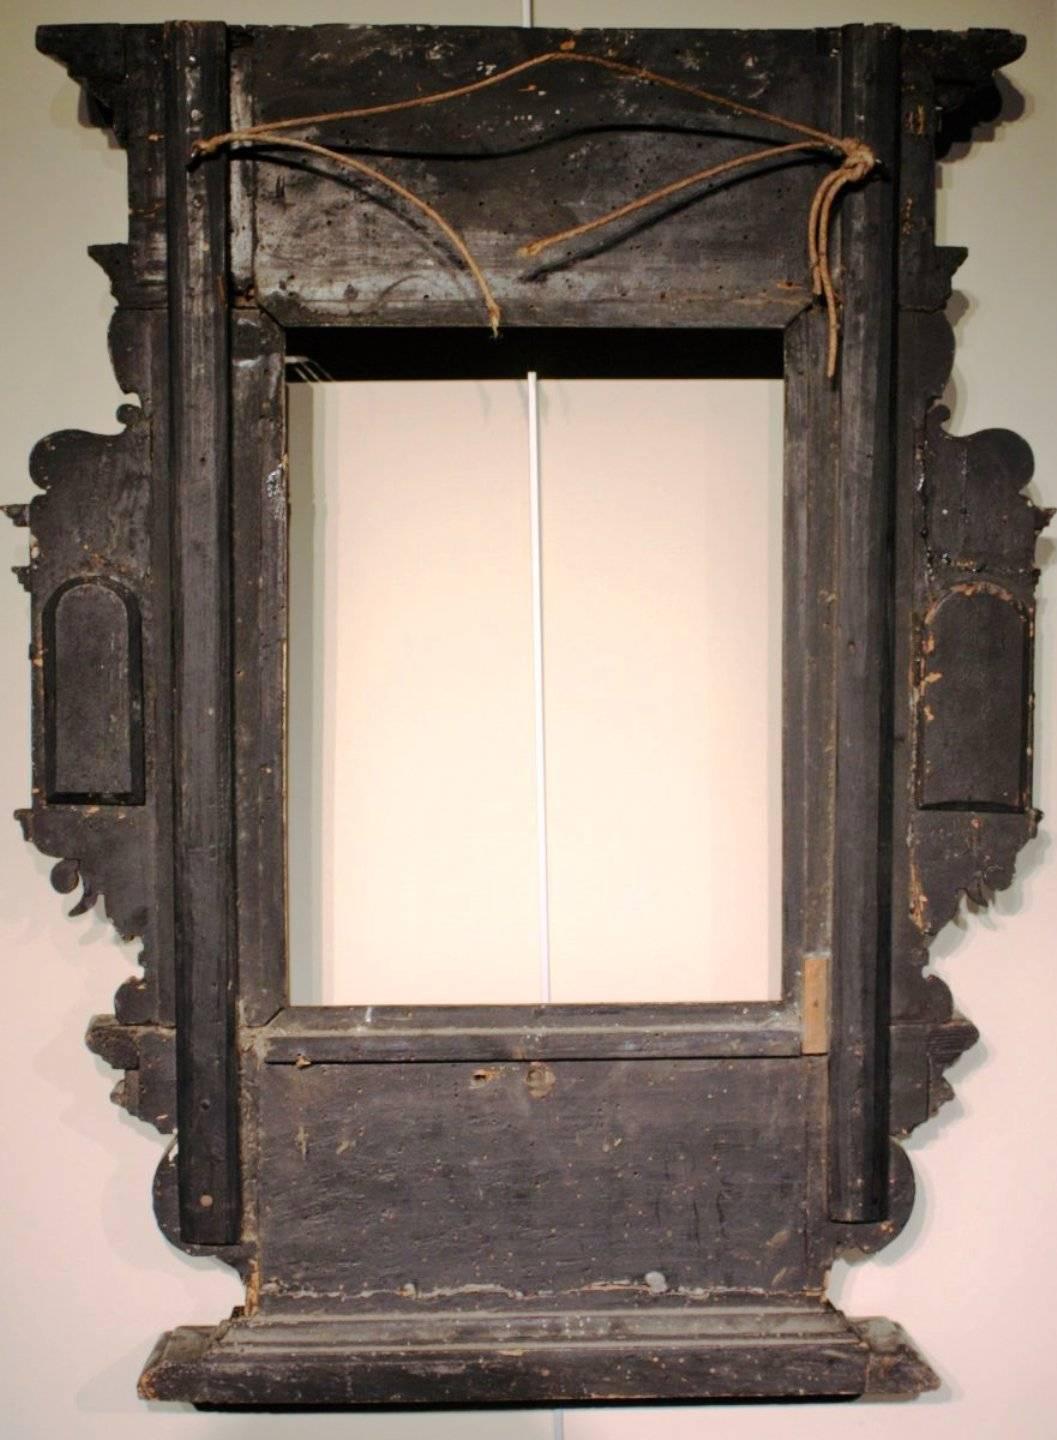 Very Rare 17th Century Tabernacle Frame Mounted as Mirror, Germany, Dated 1633 1